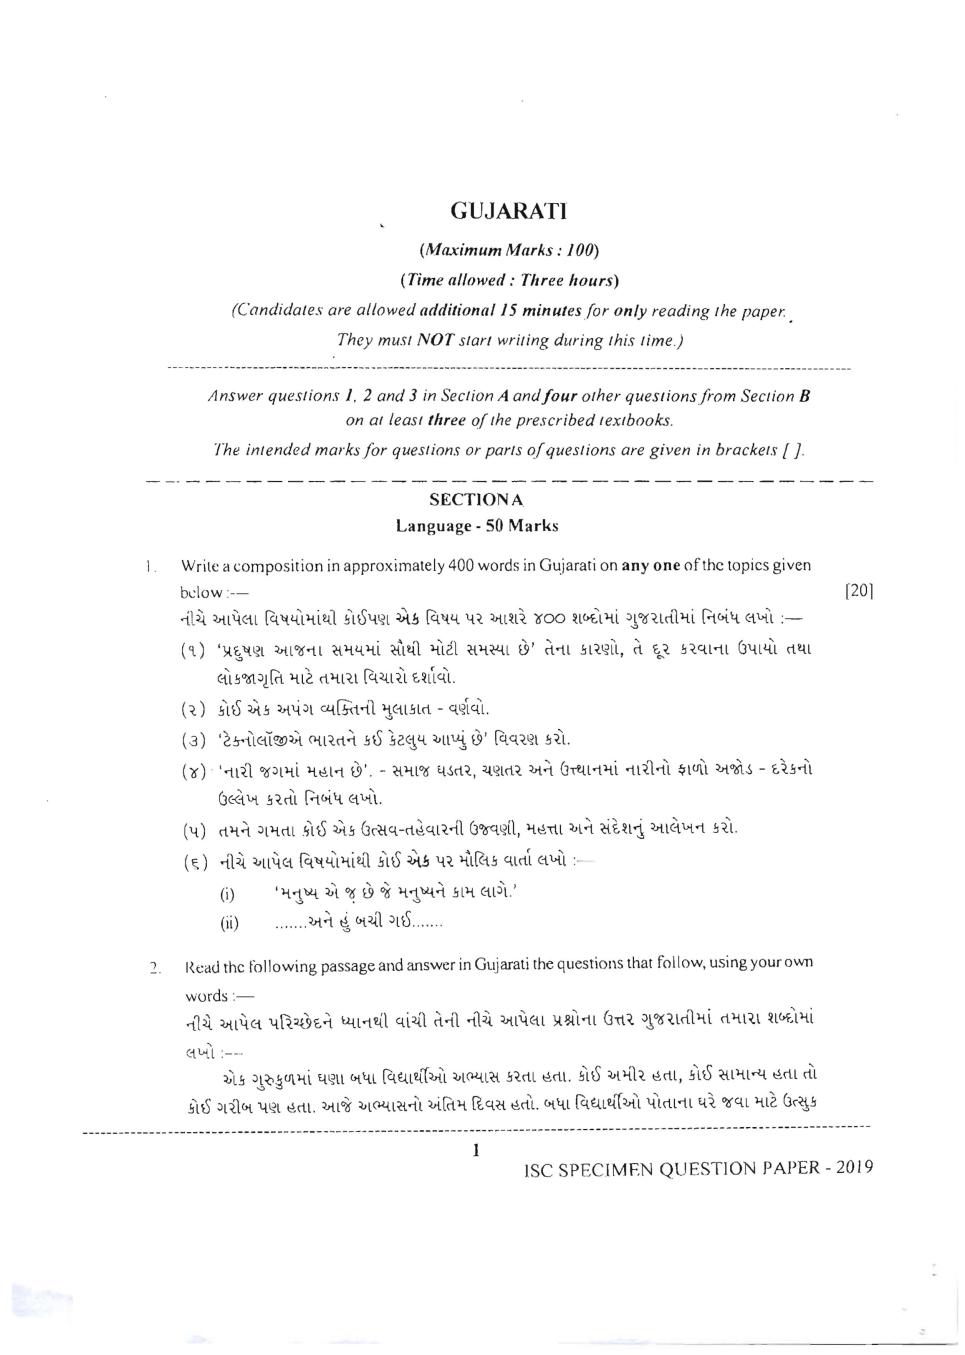 ISC Class 12 Specimen Paper 2019 for Gujarati - Page 1